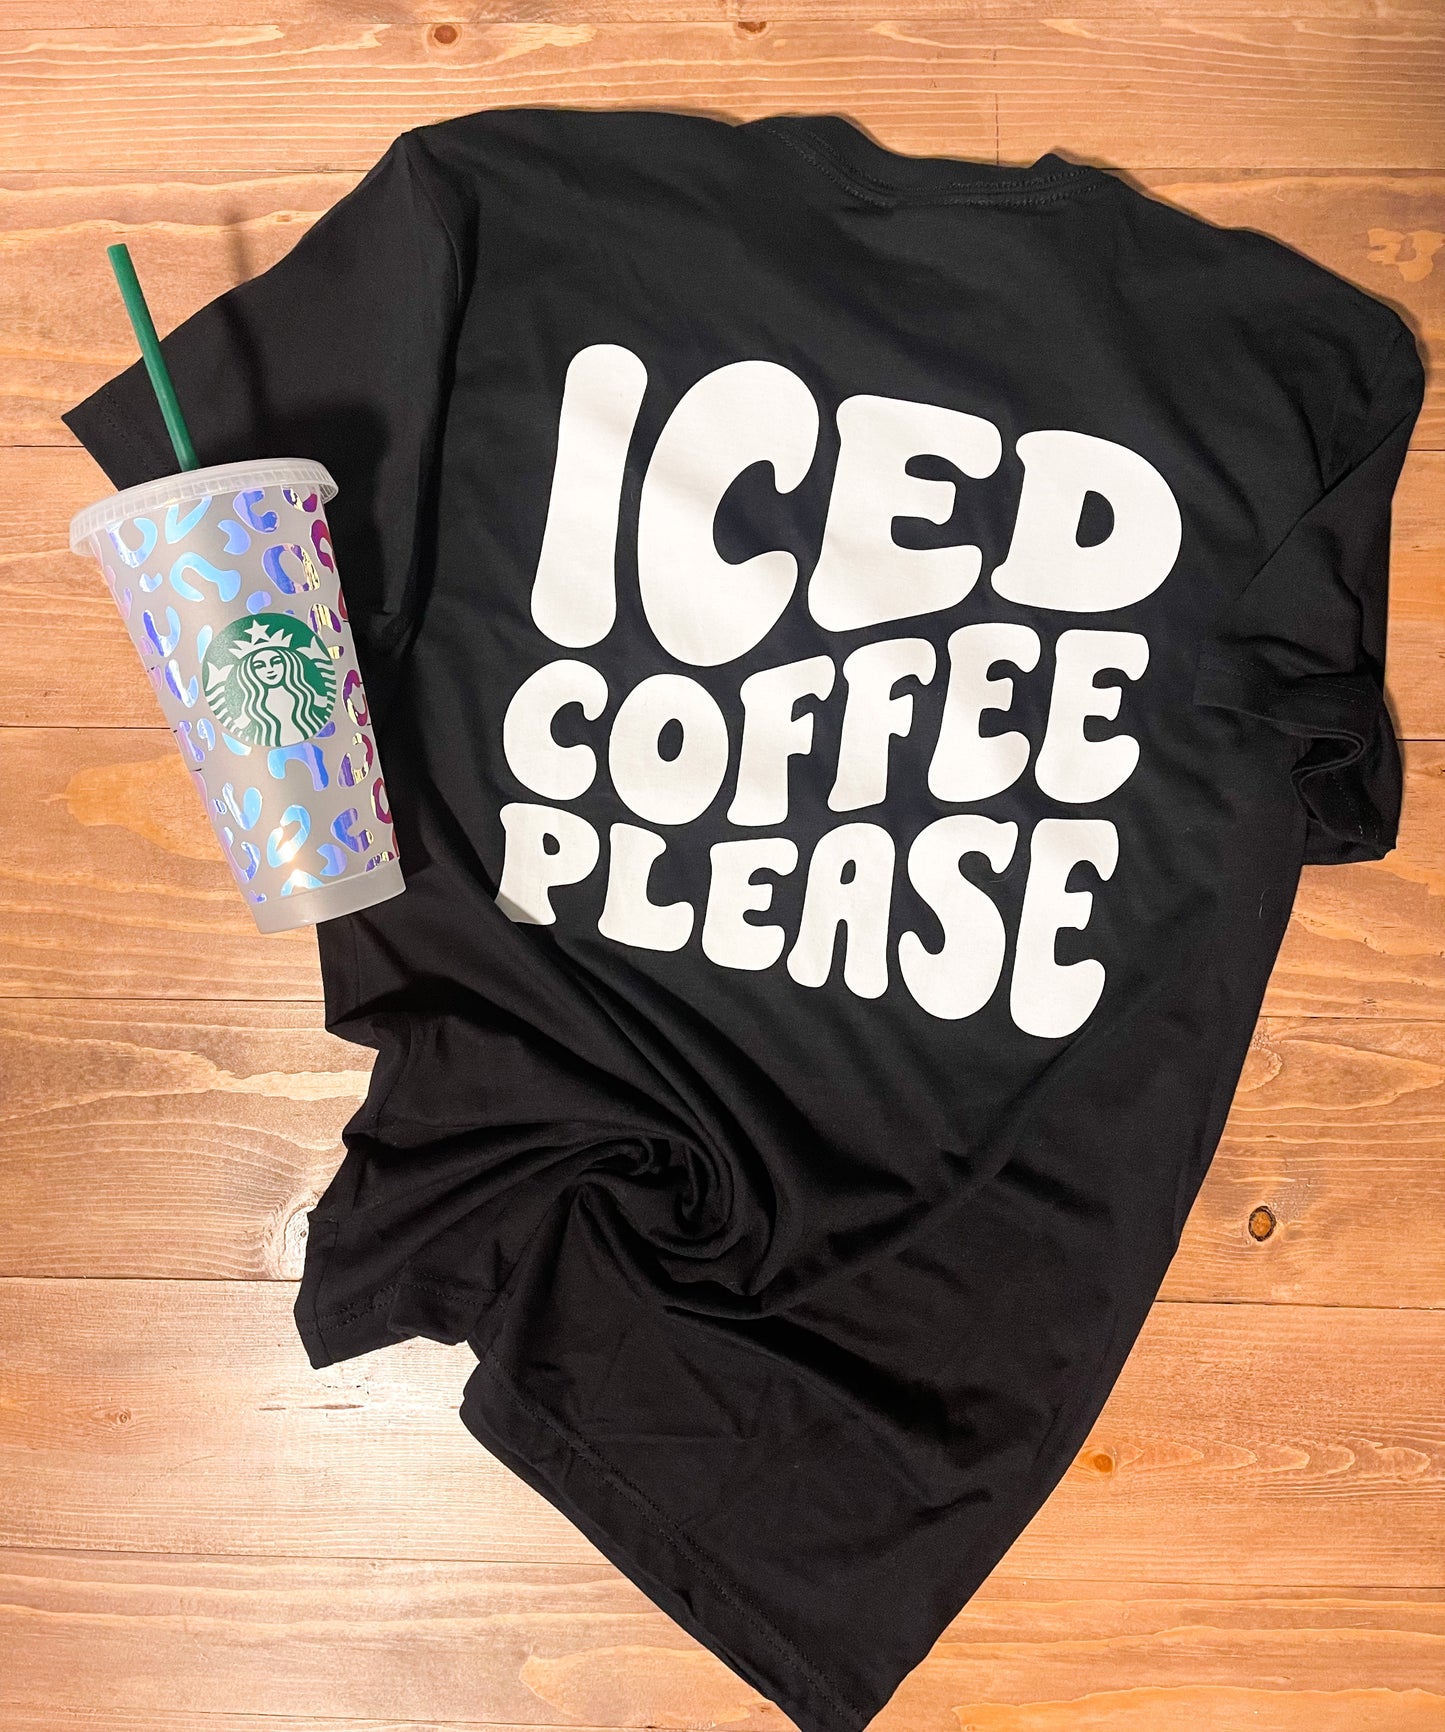 Iced Coffee Please (2 sided) - T-Shirt